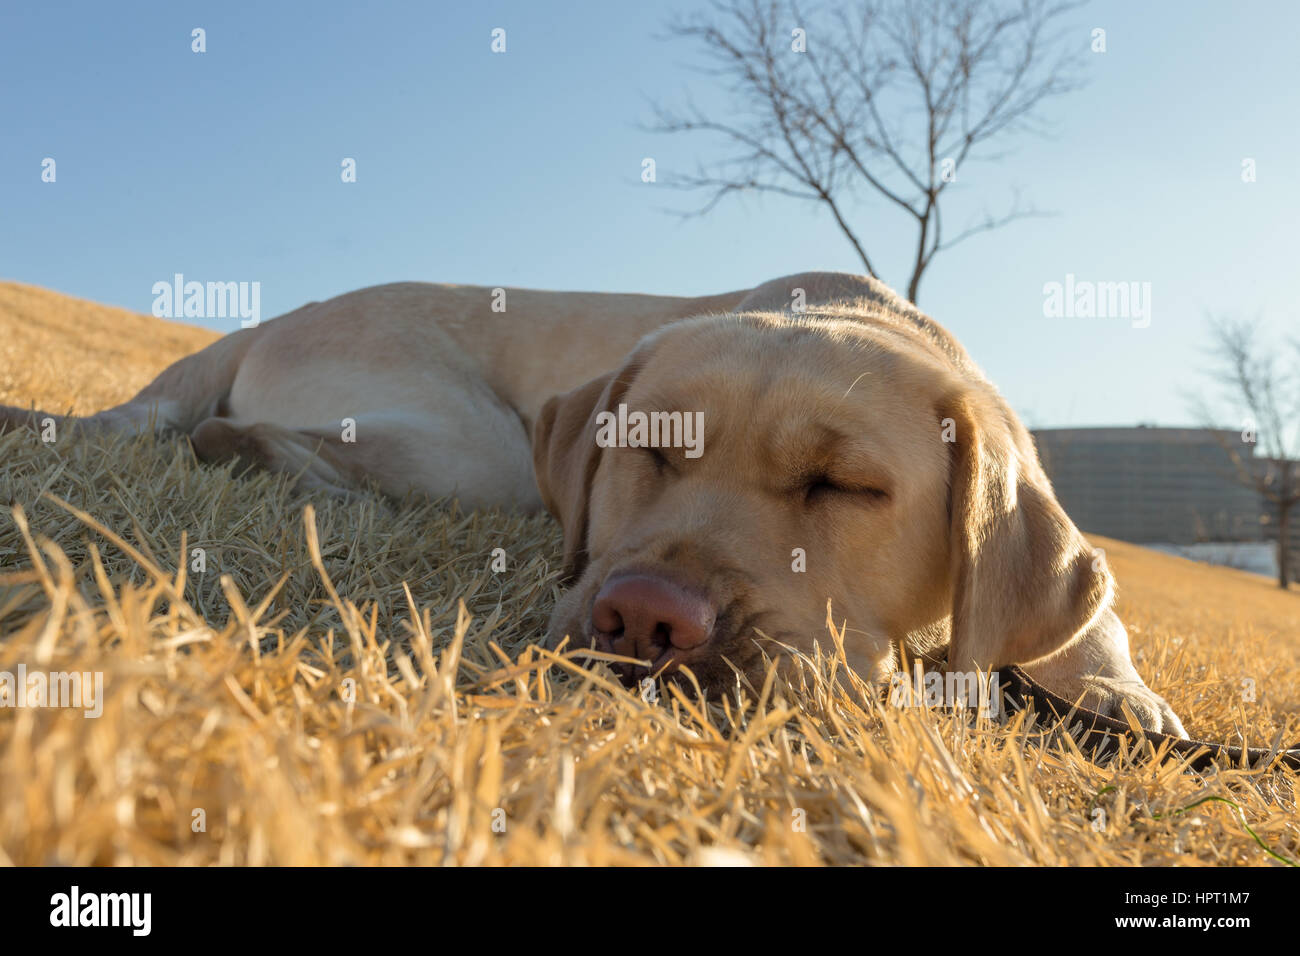 A young, cute yellow lab takes a nap in the grass on a sunny, warm early spring  day Stock Photo